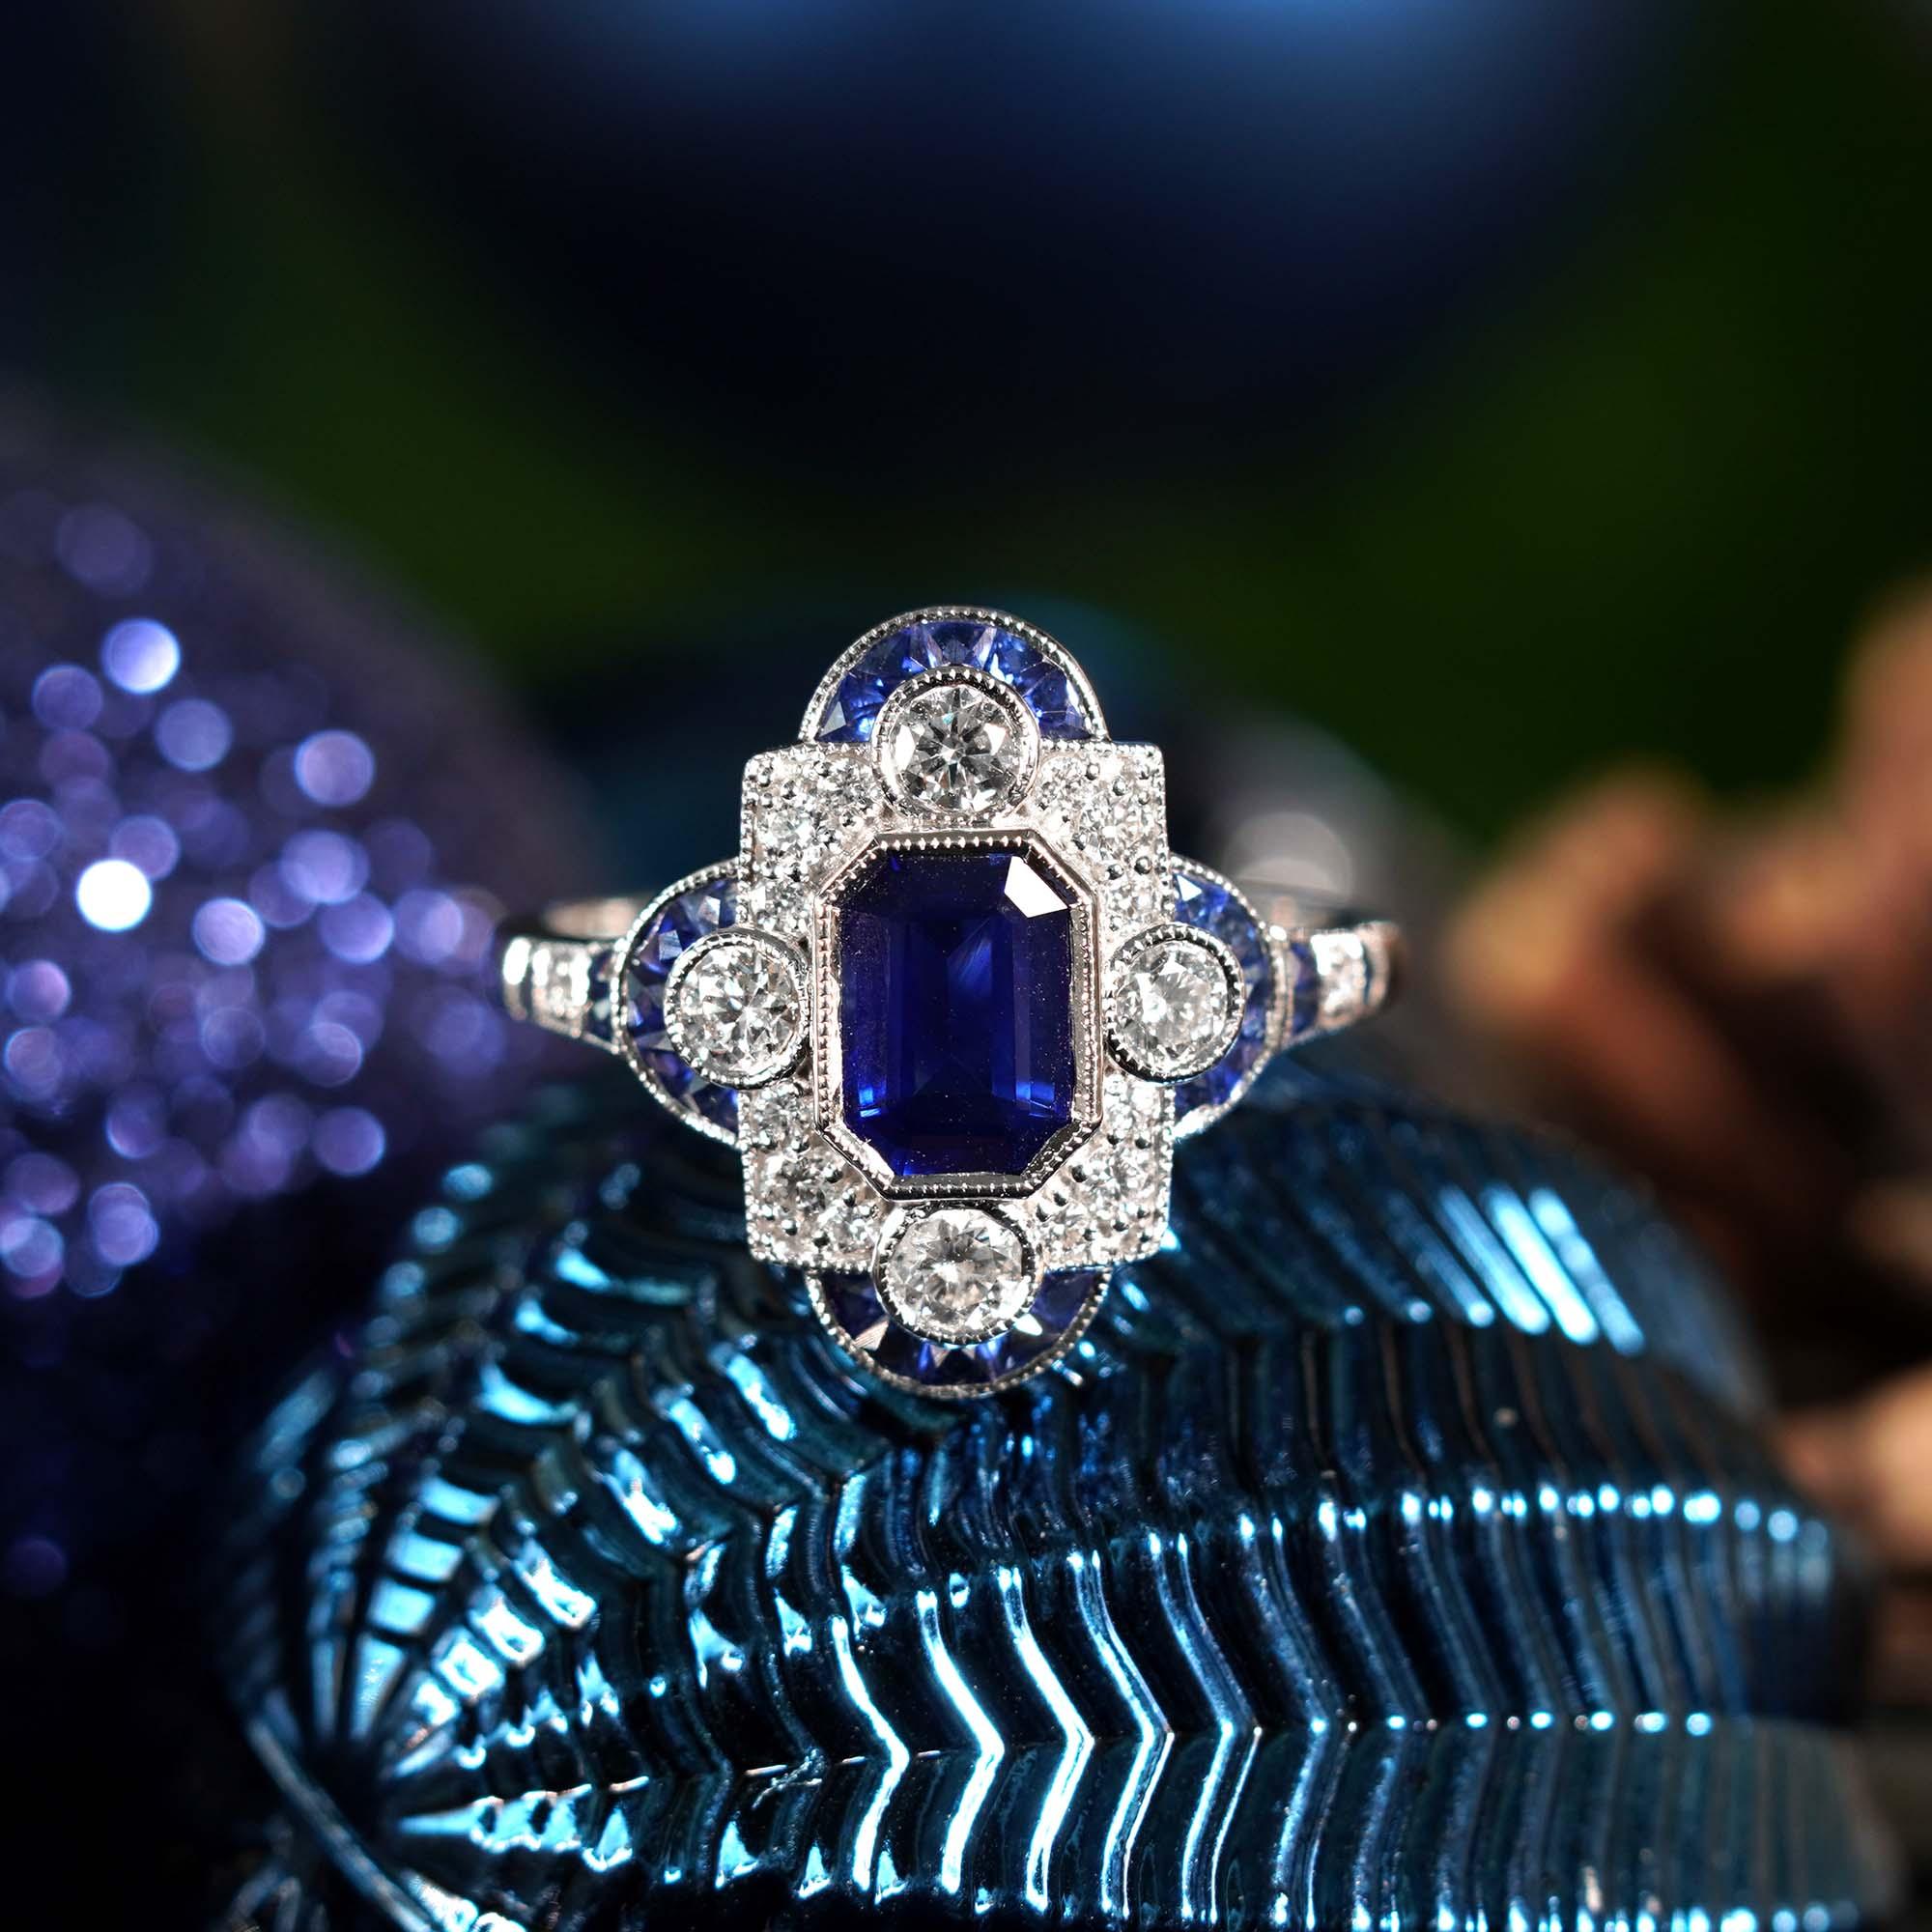 A striking and intriguing jewel, indeed. This bold Art Deco style ring highlights a gorgeous gleaming emerald cut Ceylon sapphire framed in eye-catching by white diamonds and French cut blue sapphires. Each side and shoulders set off with round